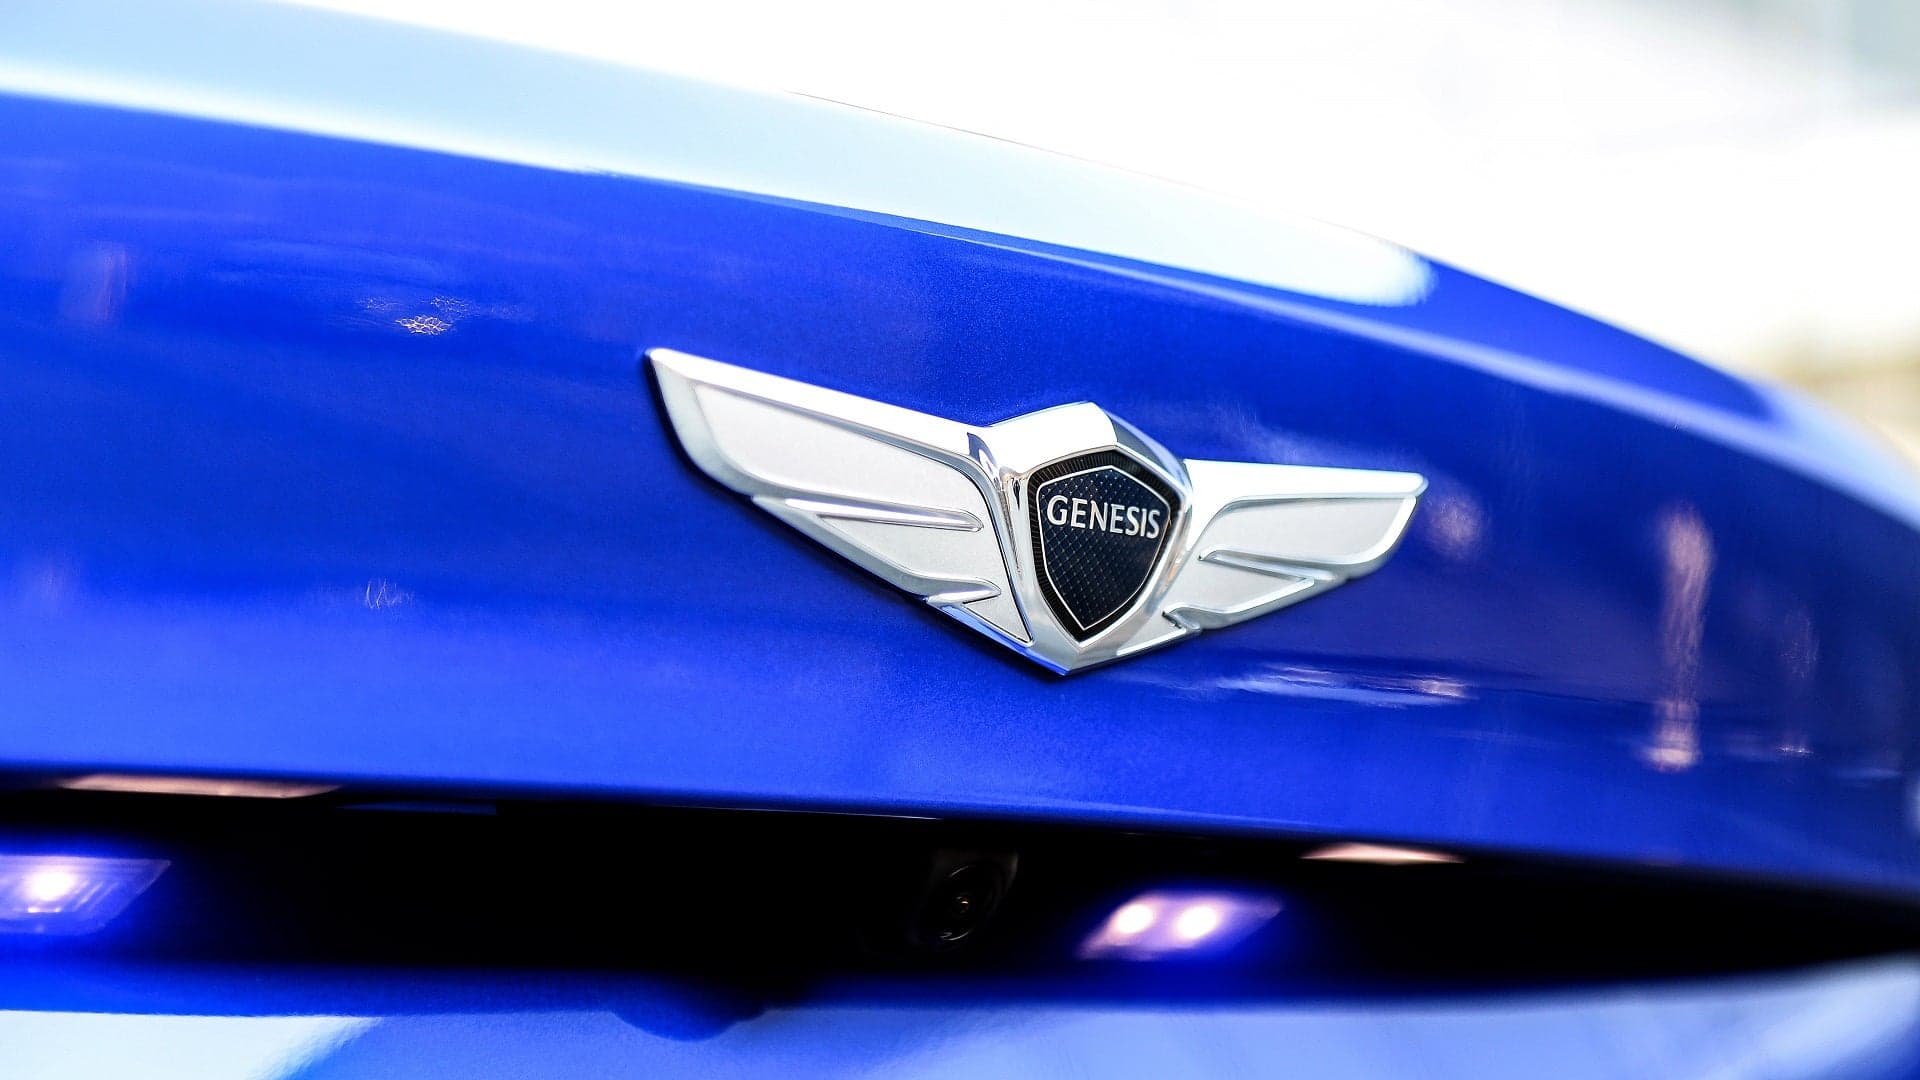 Luxury Cars Are Needlessly Complicated, Genesis Boss Says